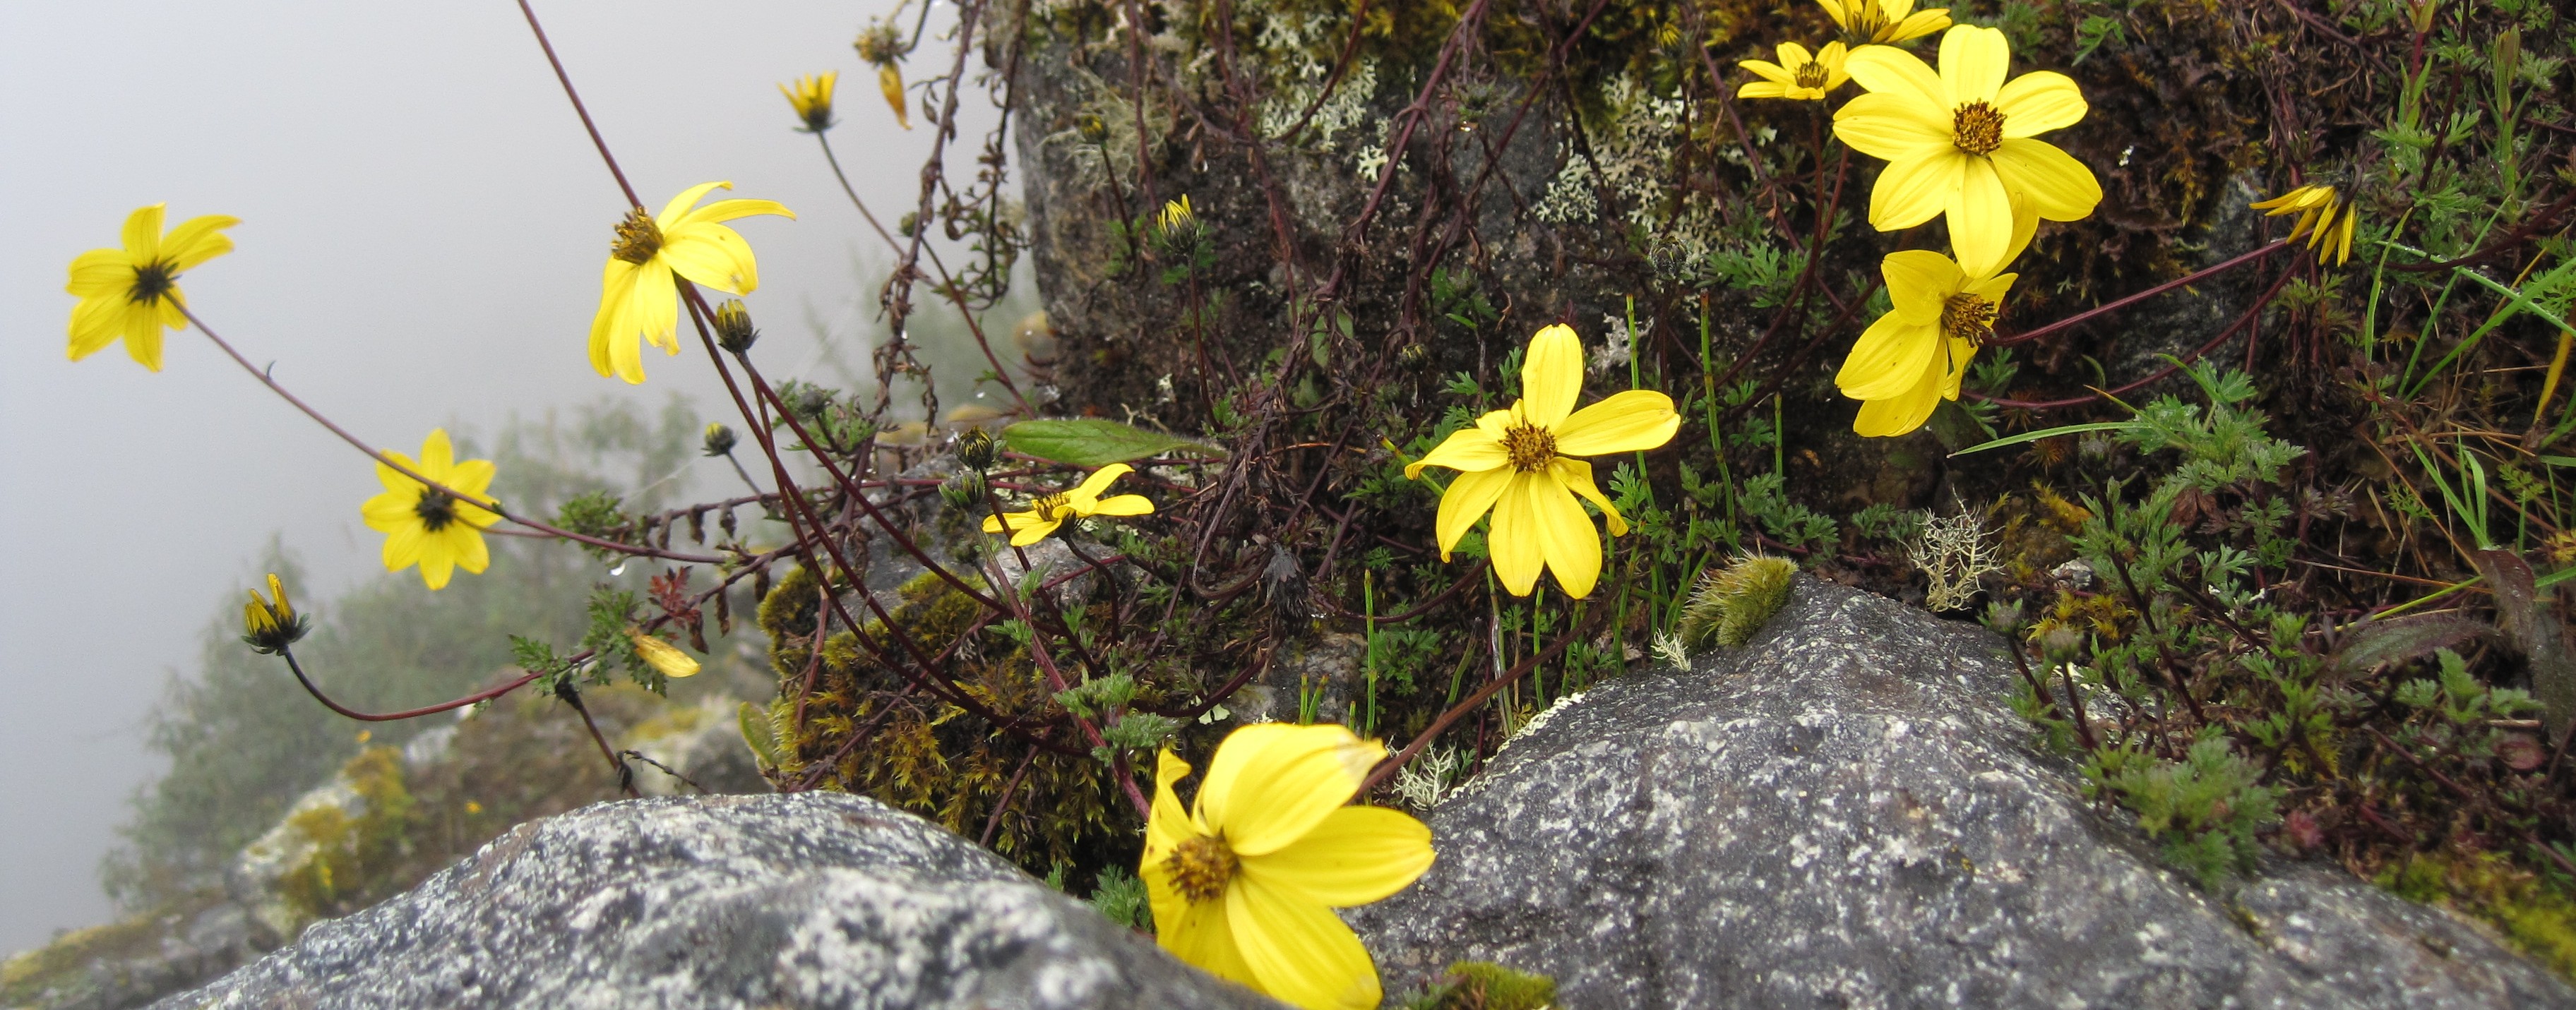 Flowers in the Ruins, Inca Trail, Perú